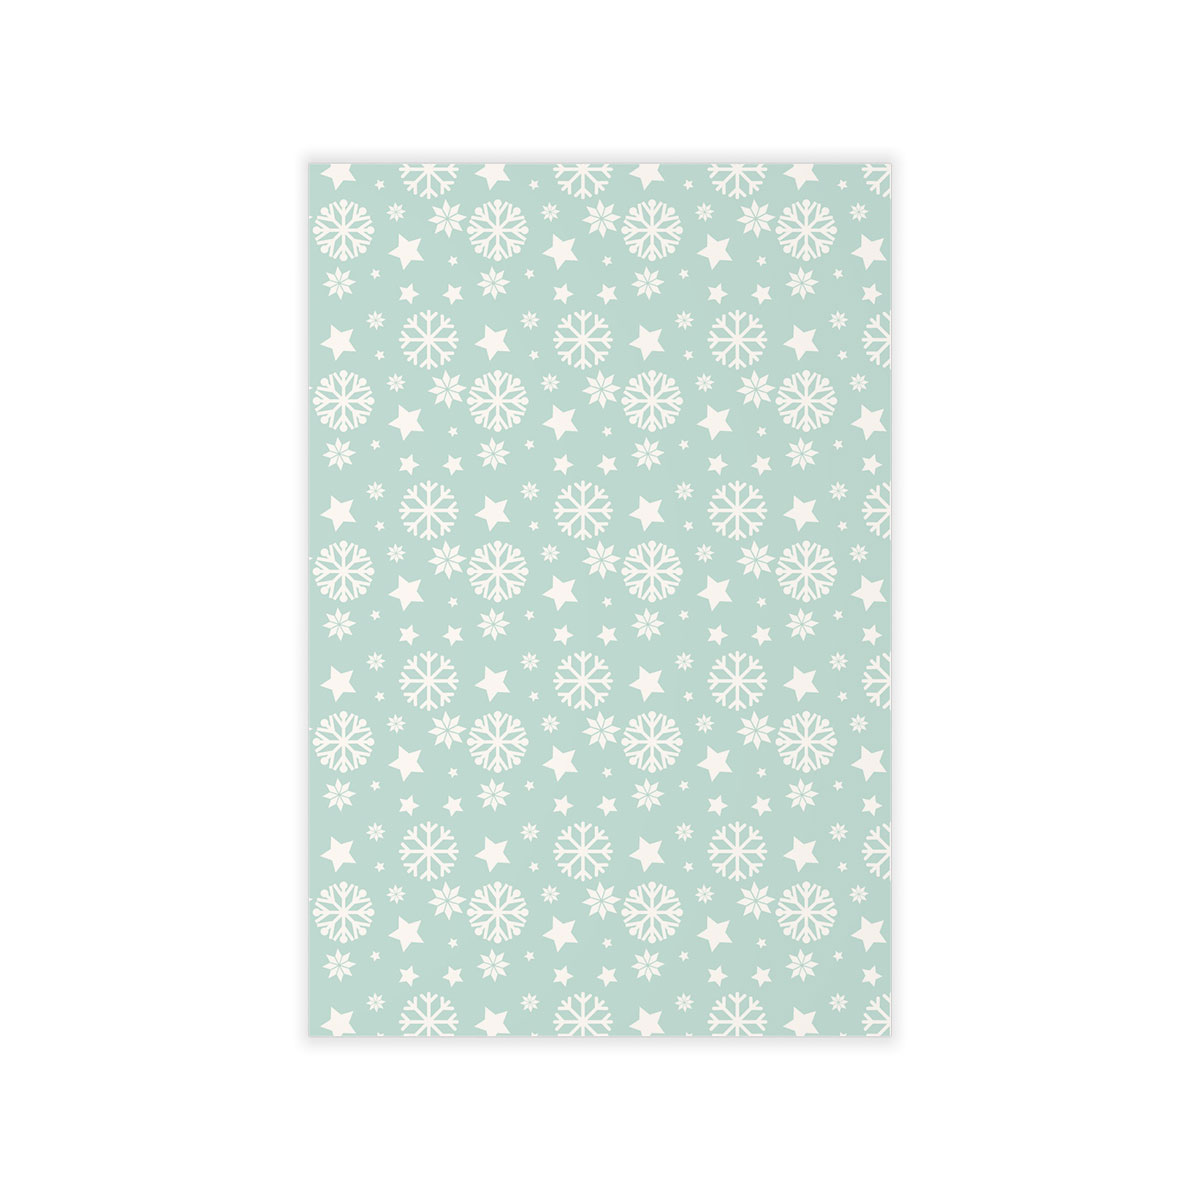 White And Light Green Snowflake And Christmas Stars Wall Decals